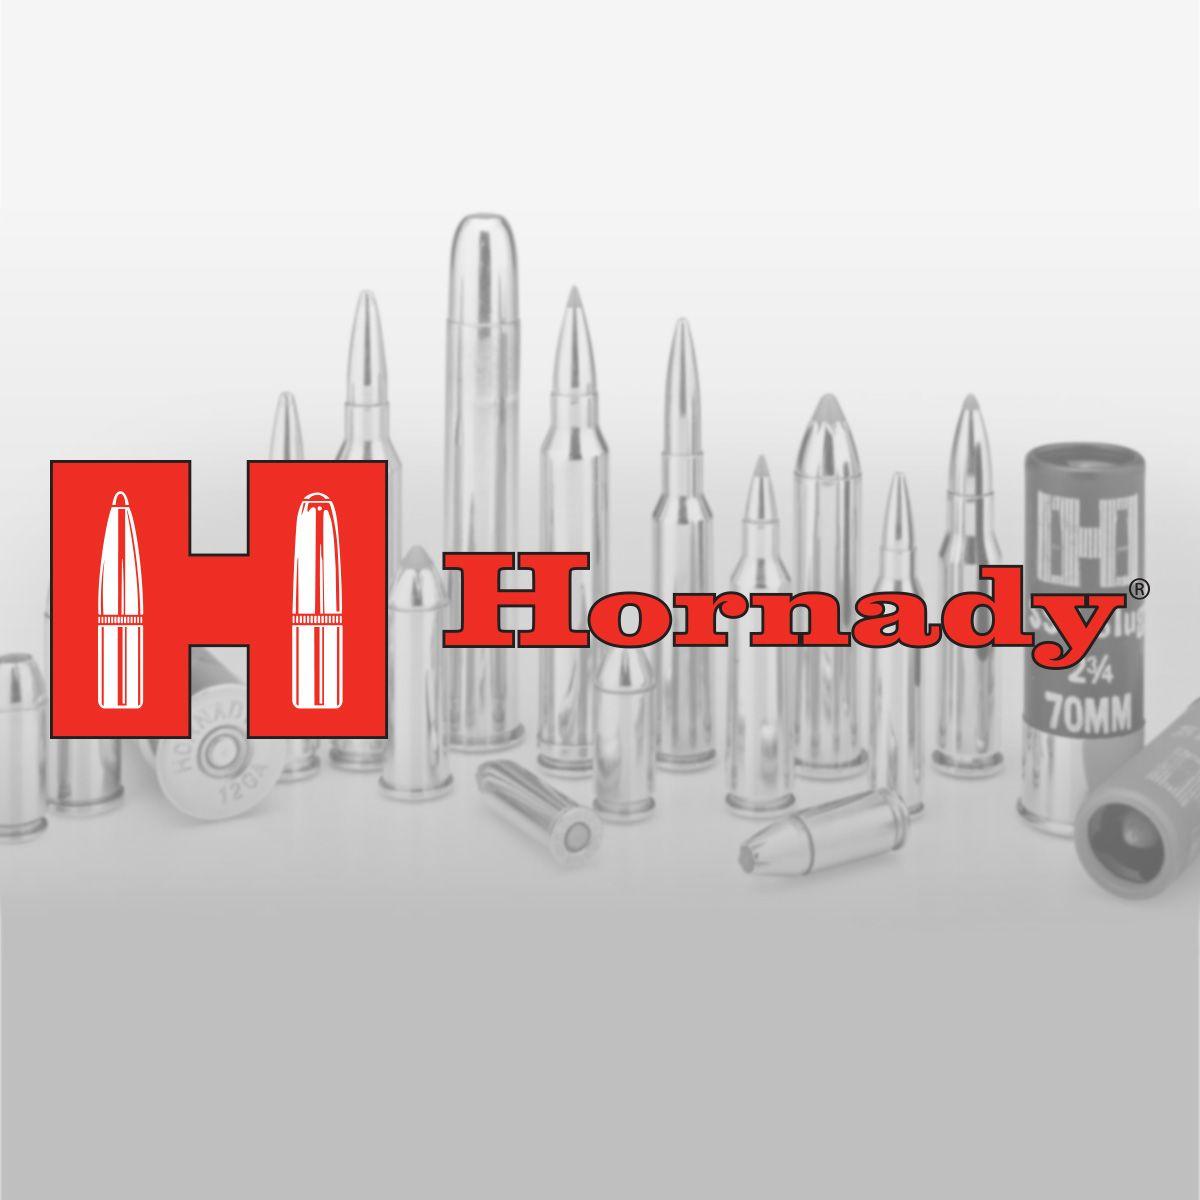 Hornady Logo - Accurate, Deadly, Dependable - Hornady Manufacturing, Inc